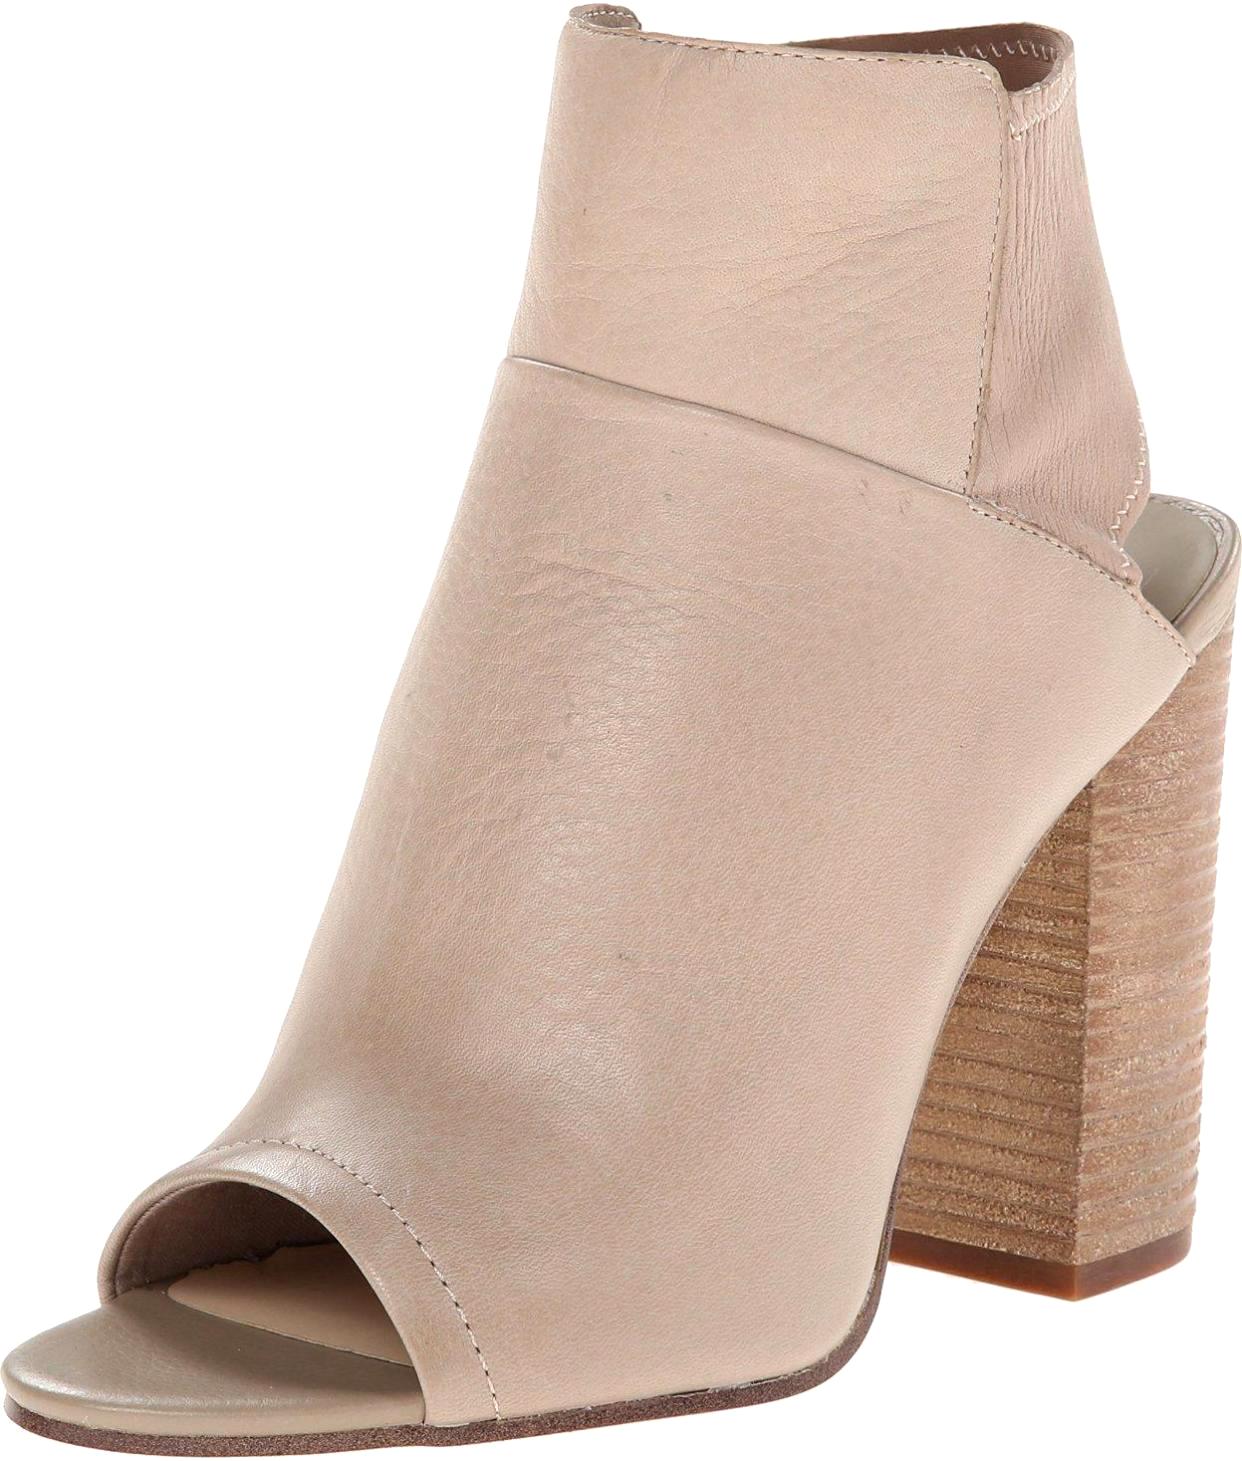 Dolce Vita Leka Bootie in Taupe